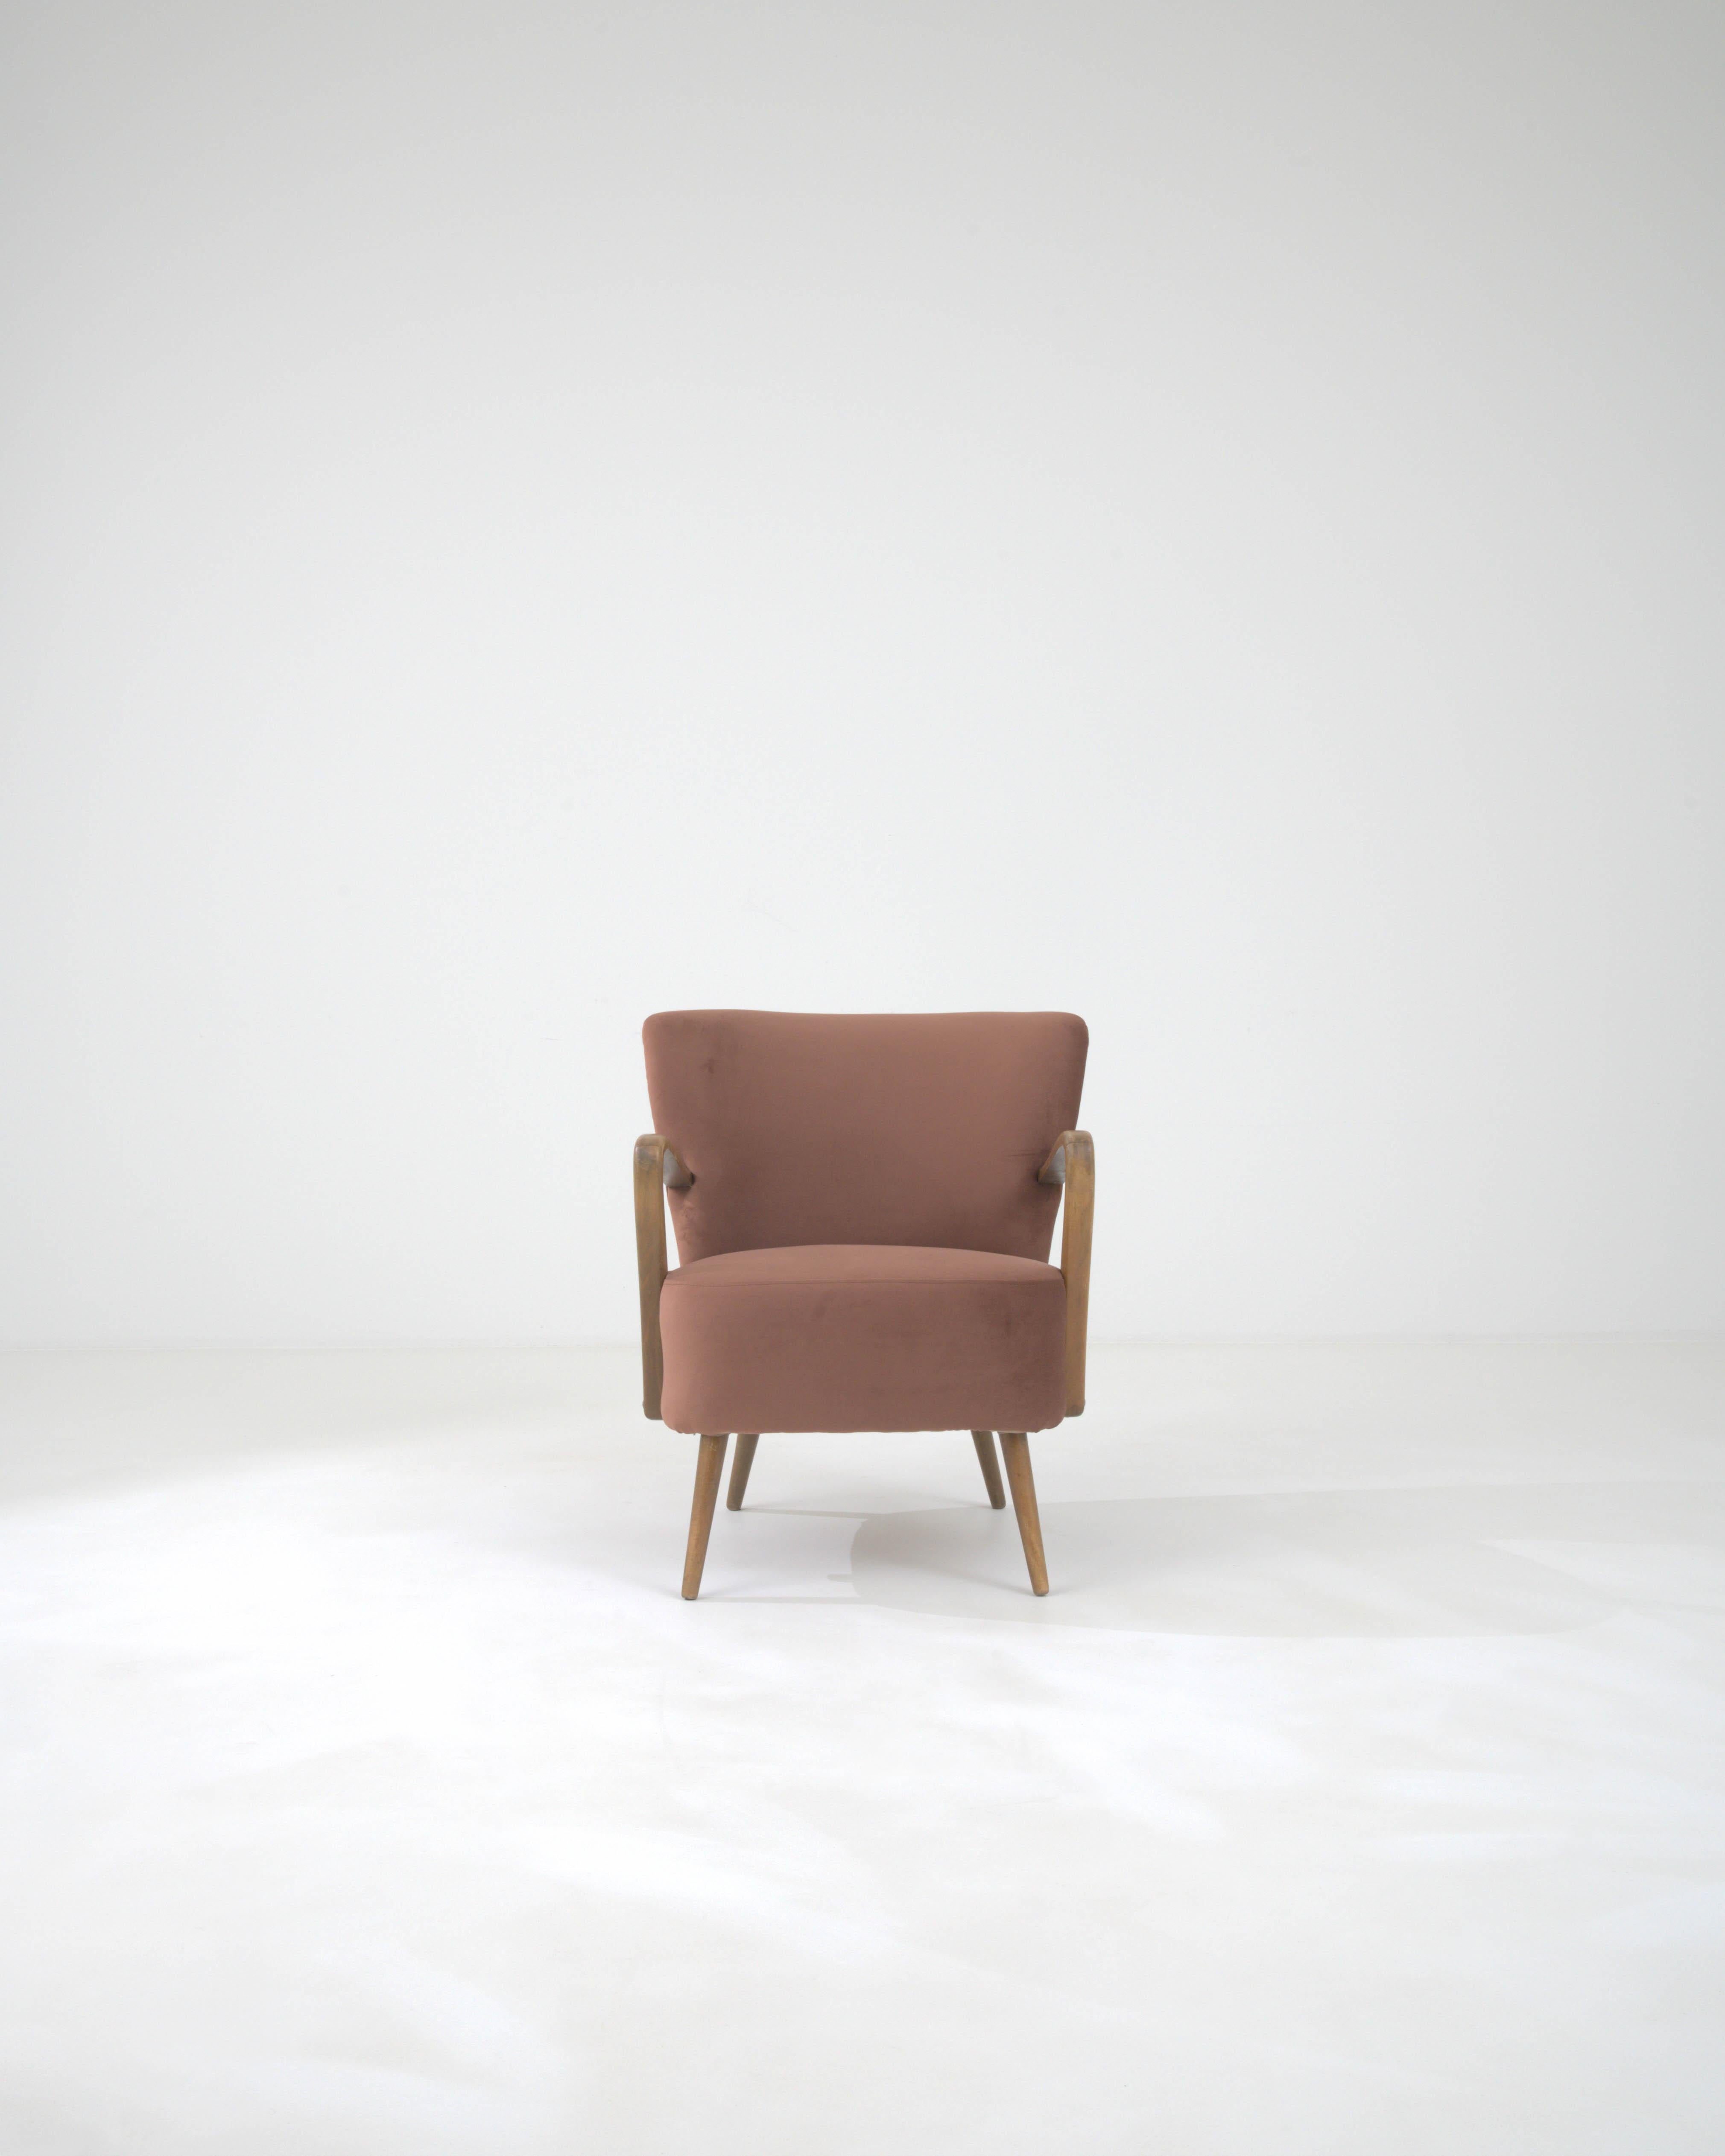 Introducing the 20th Century Danish Upholstered Armchair, a fusion of minimalist design and comfort that brings a touch of Scandinavian sophistication to any room. This mid-century modern gem features a sleek, organic wooden frame complemented by a